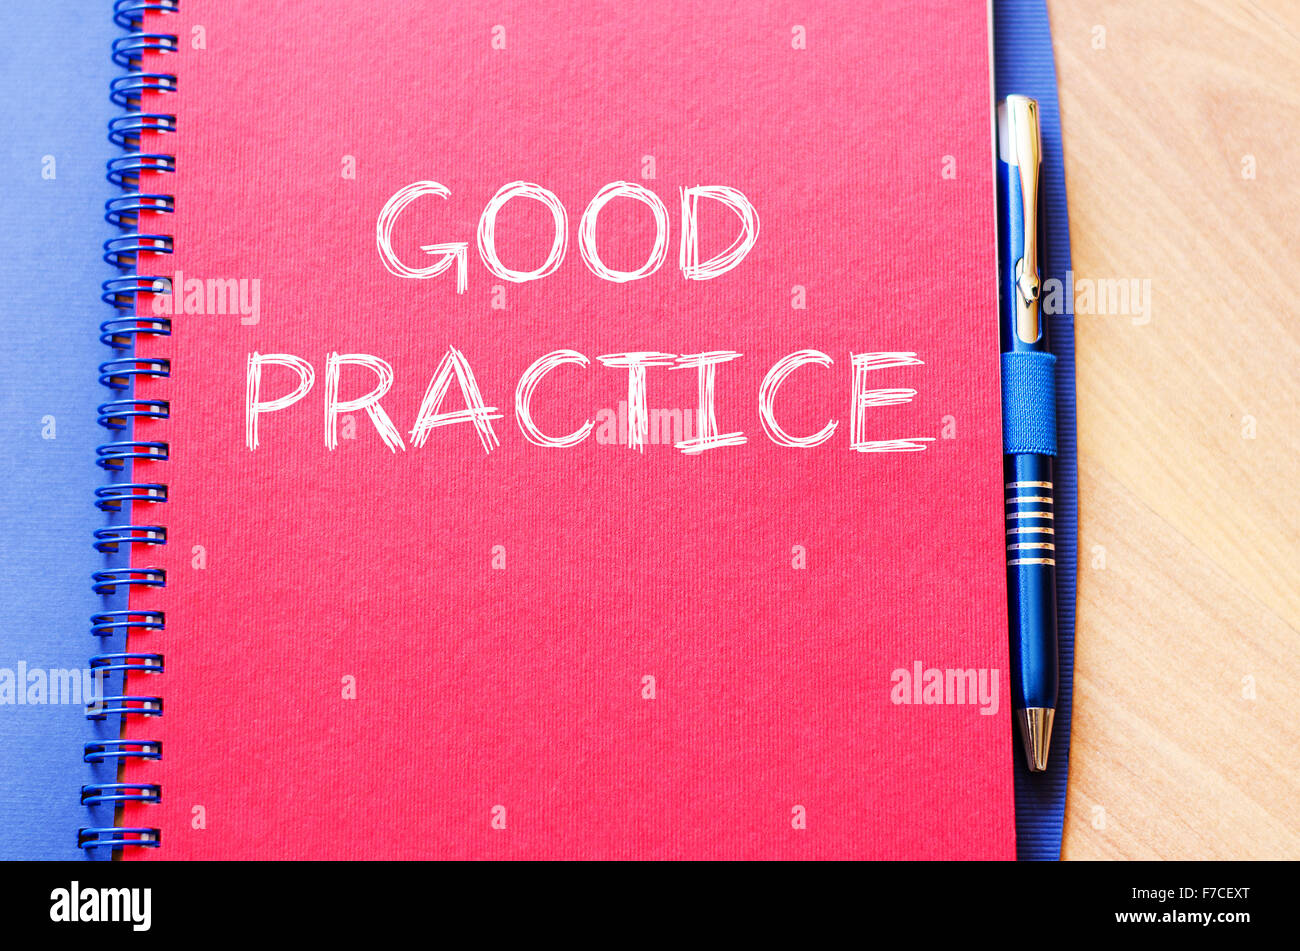 Good practice text concept write on notebook with pen Stock Photo